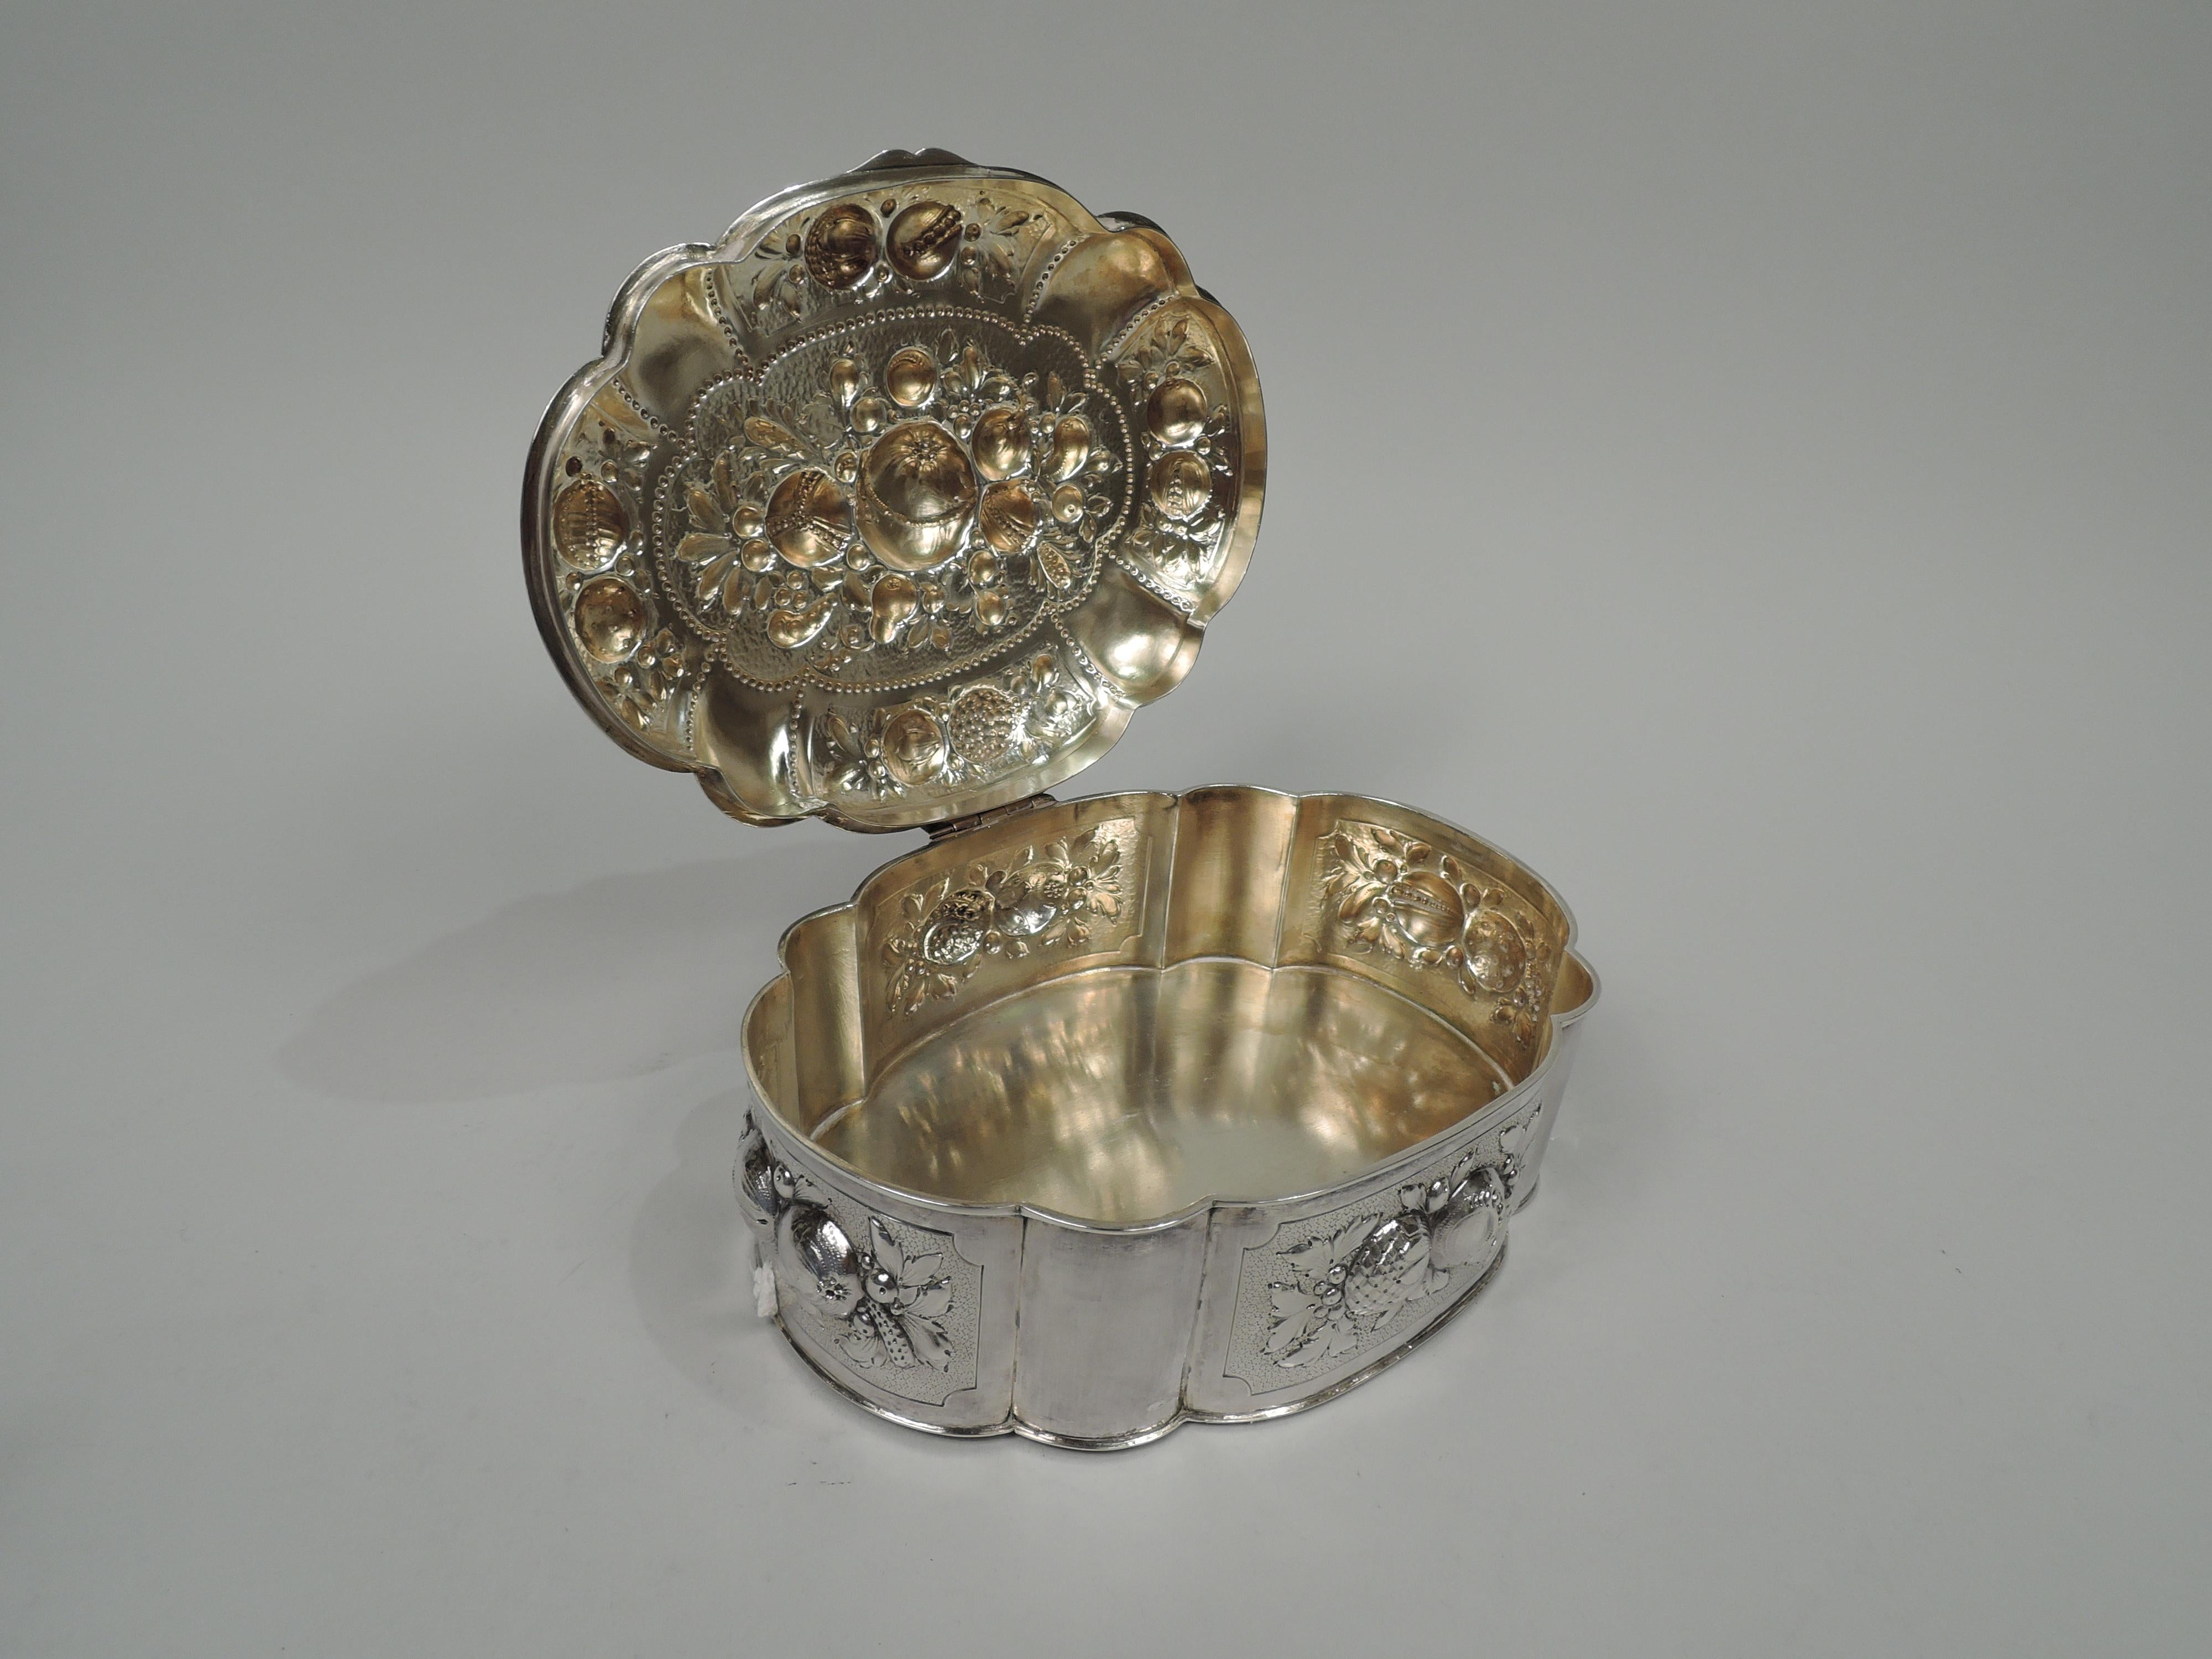 German 800 silver box, ca 1910. Oval and lobed. Cover hinged and raised with scroll tab. Sides have chased and engraved fruits and foliage on stippled ground in curvilinear frames alternating with plain lobes. Cover top same with beaded frames.